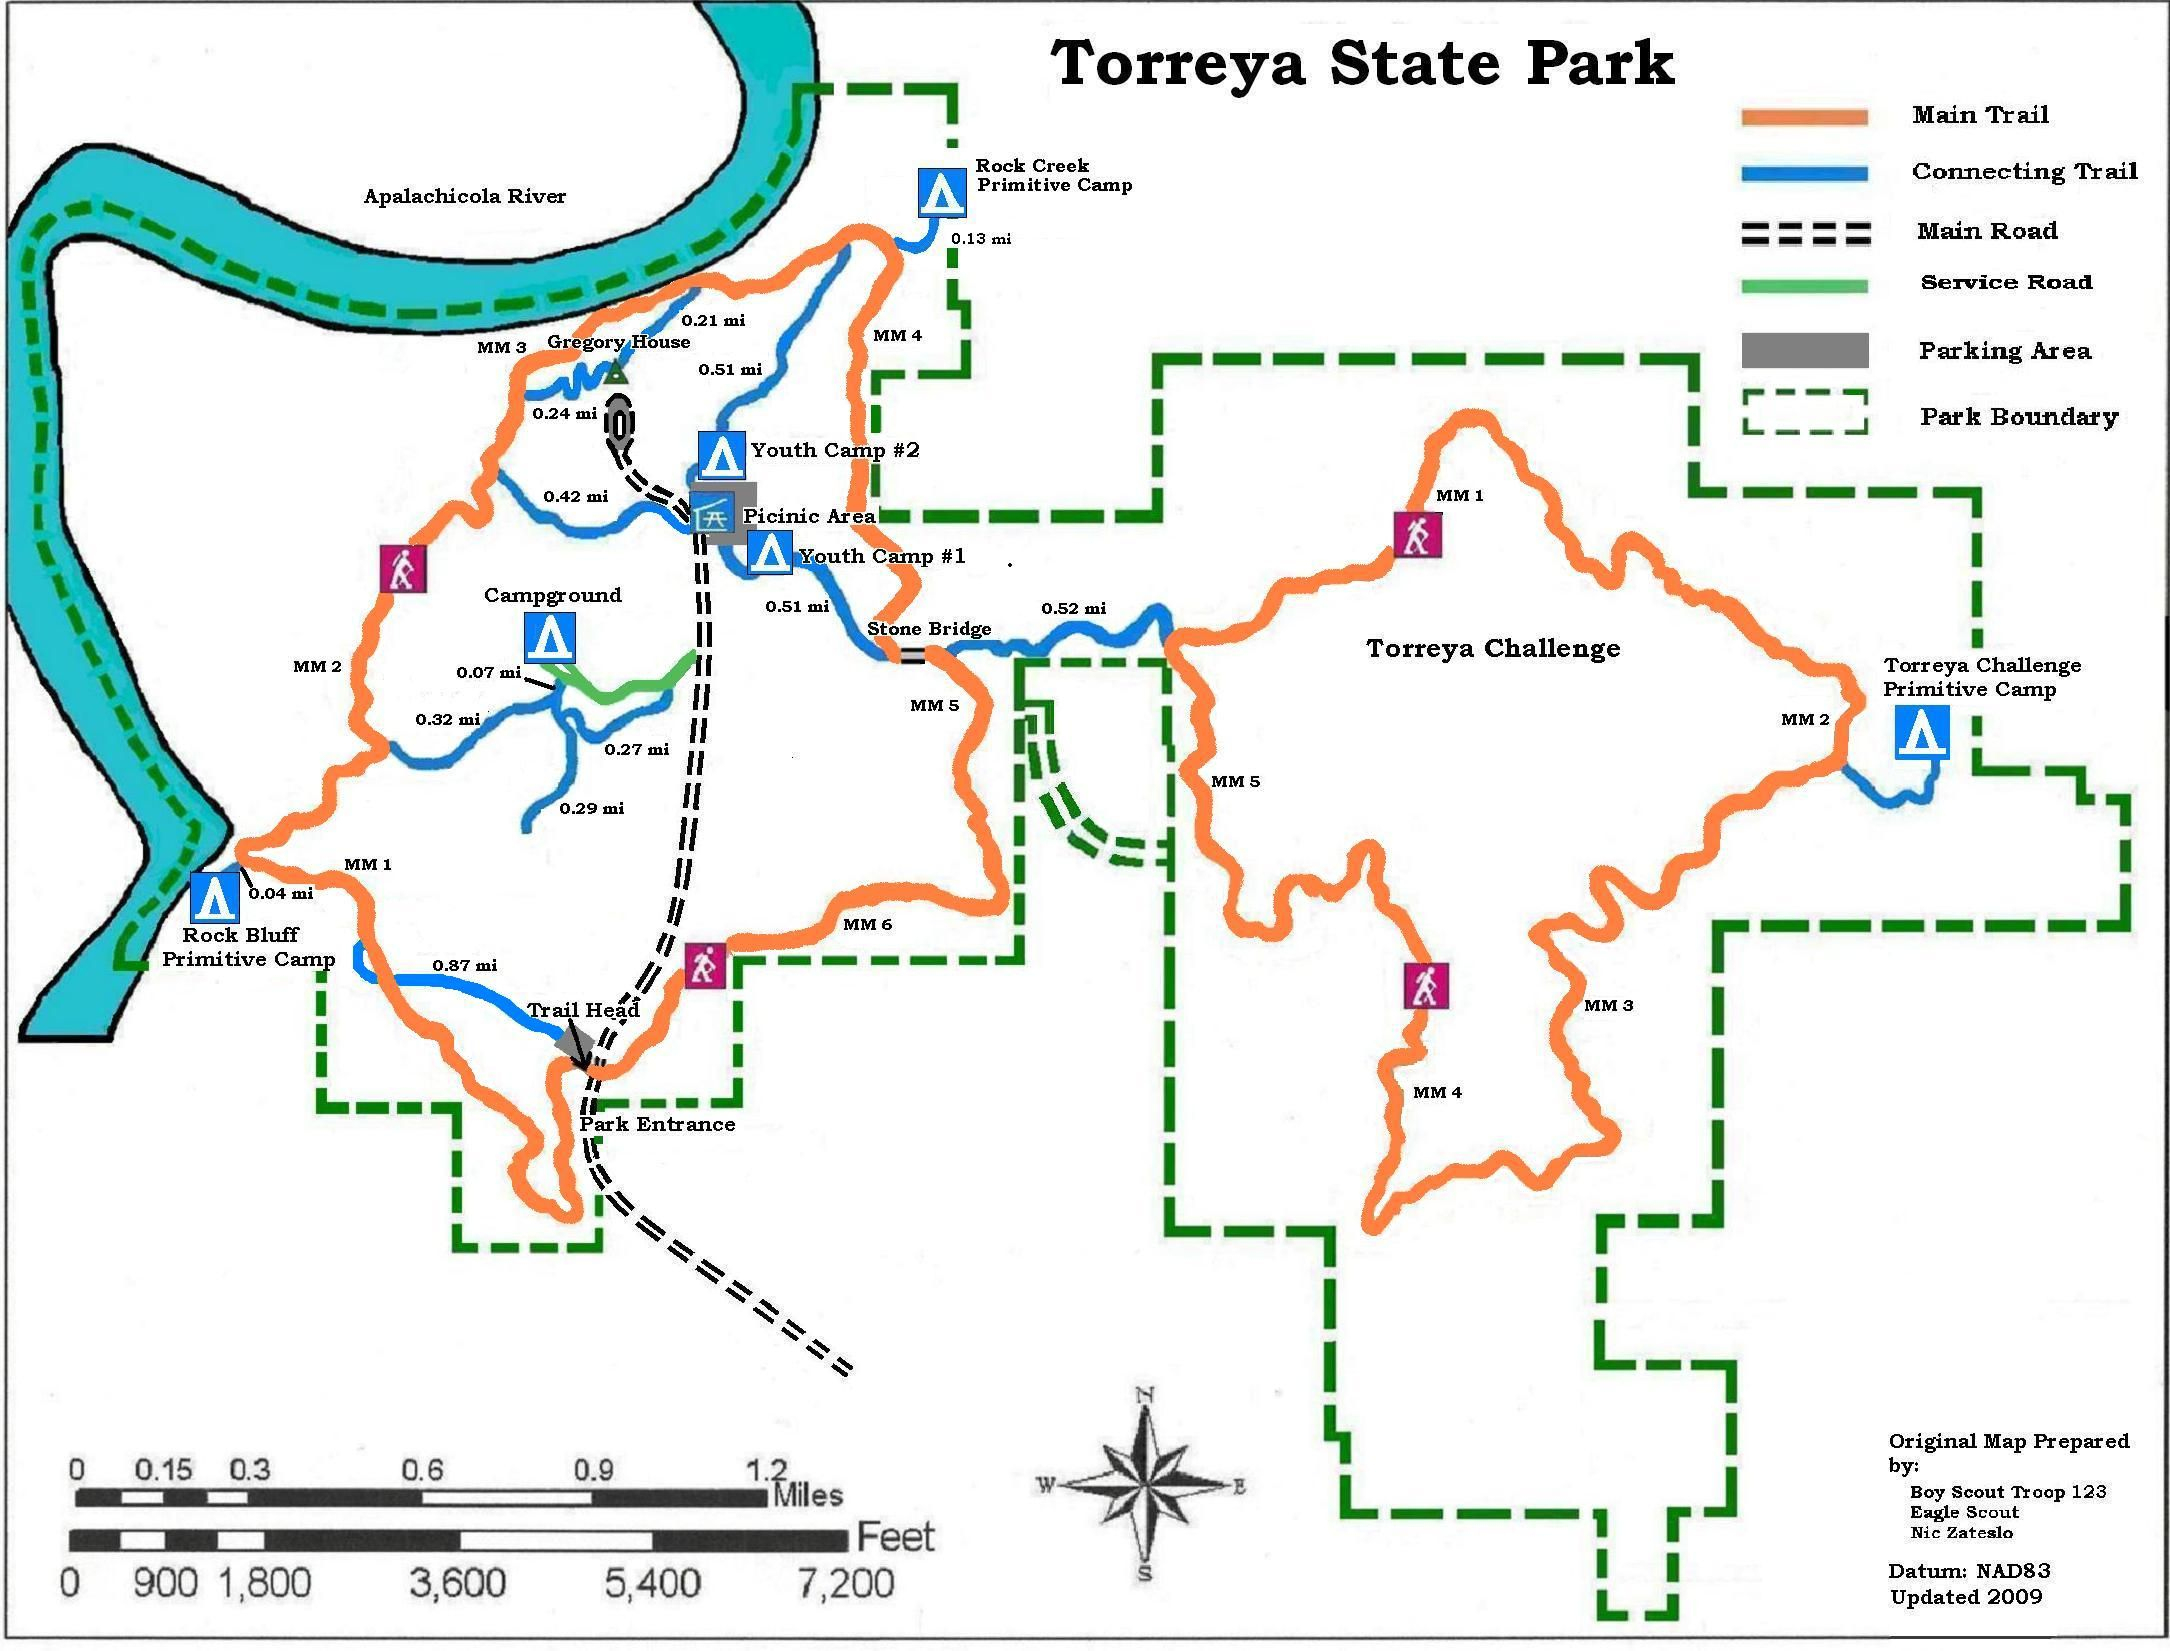 Apalachicola National Forest Campgrounds | Map Of Torreya State Park - Florida State Parks Rv Camping Map